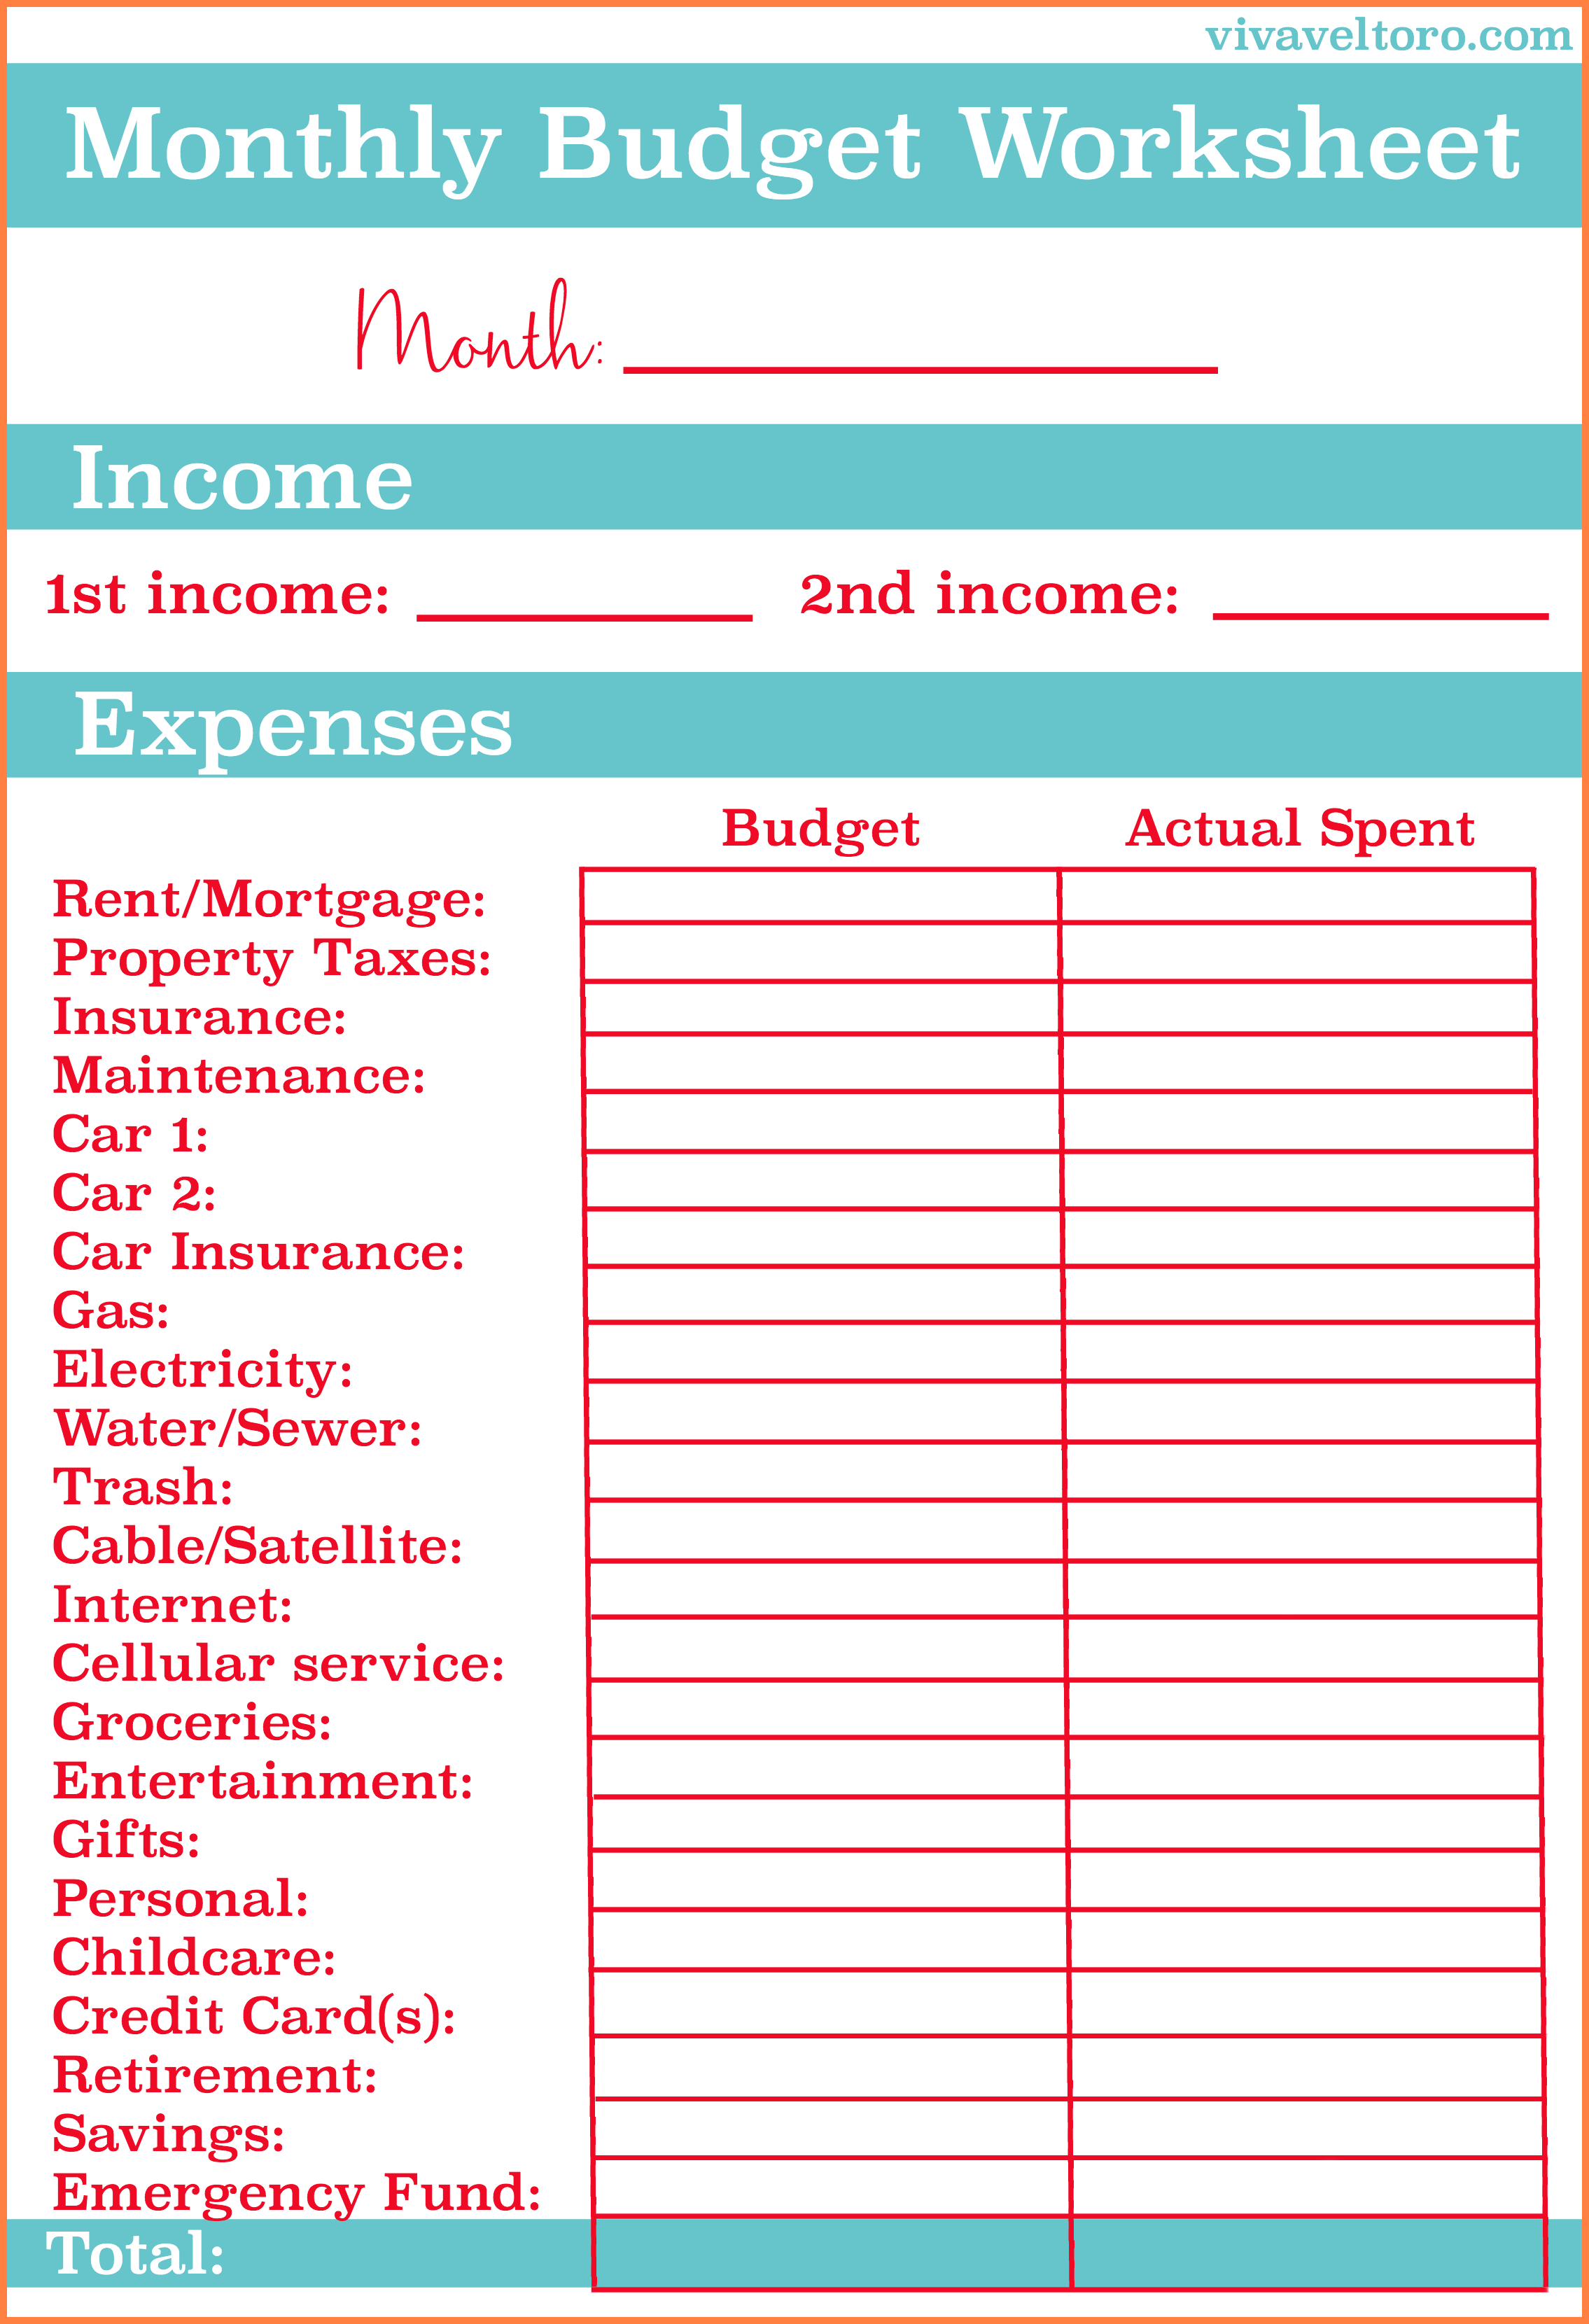 college-life-made-easy-student-advice-blog-monthly-budget-template